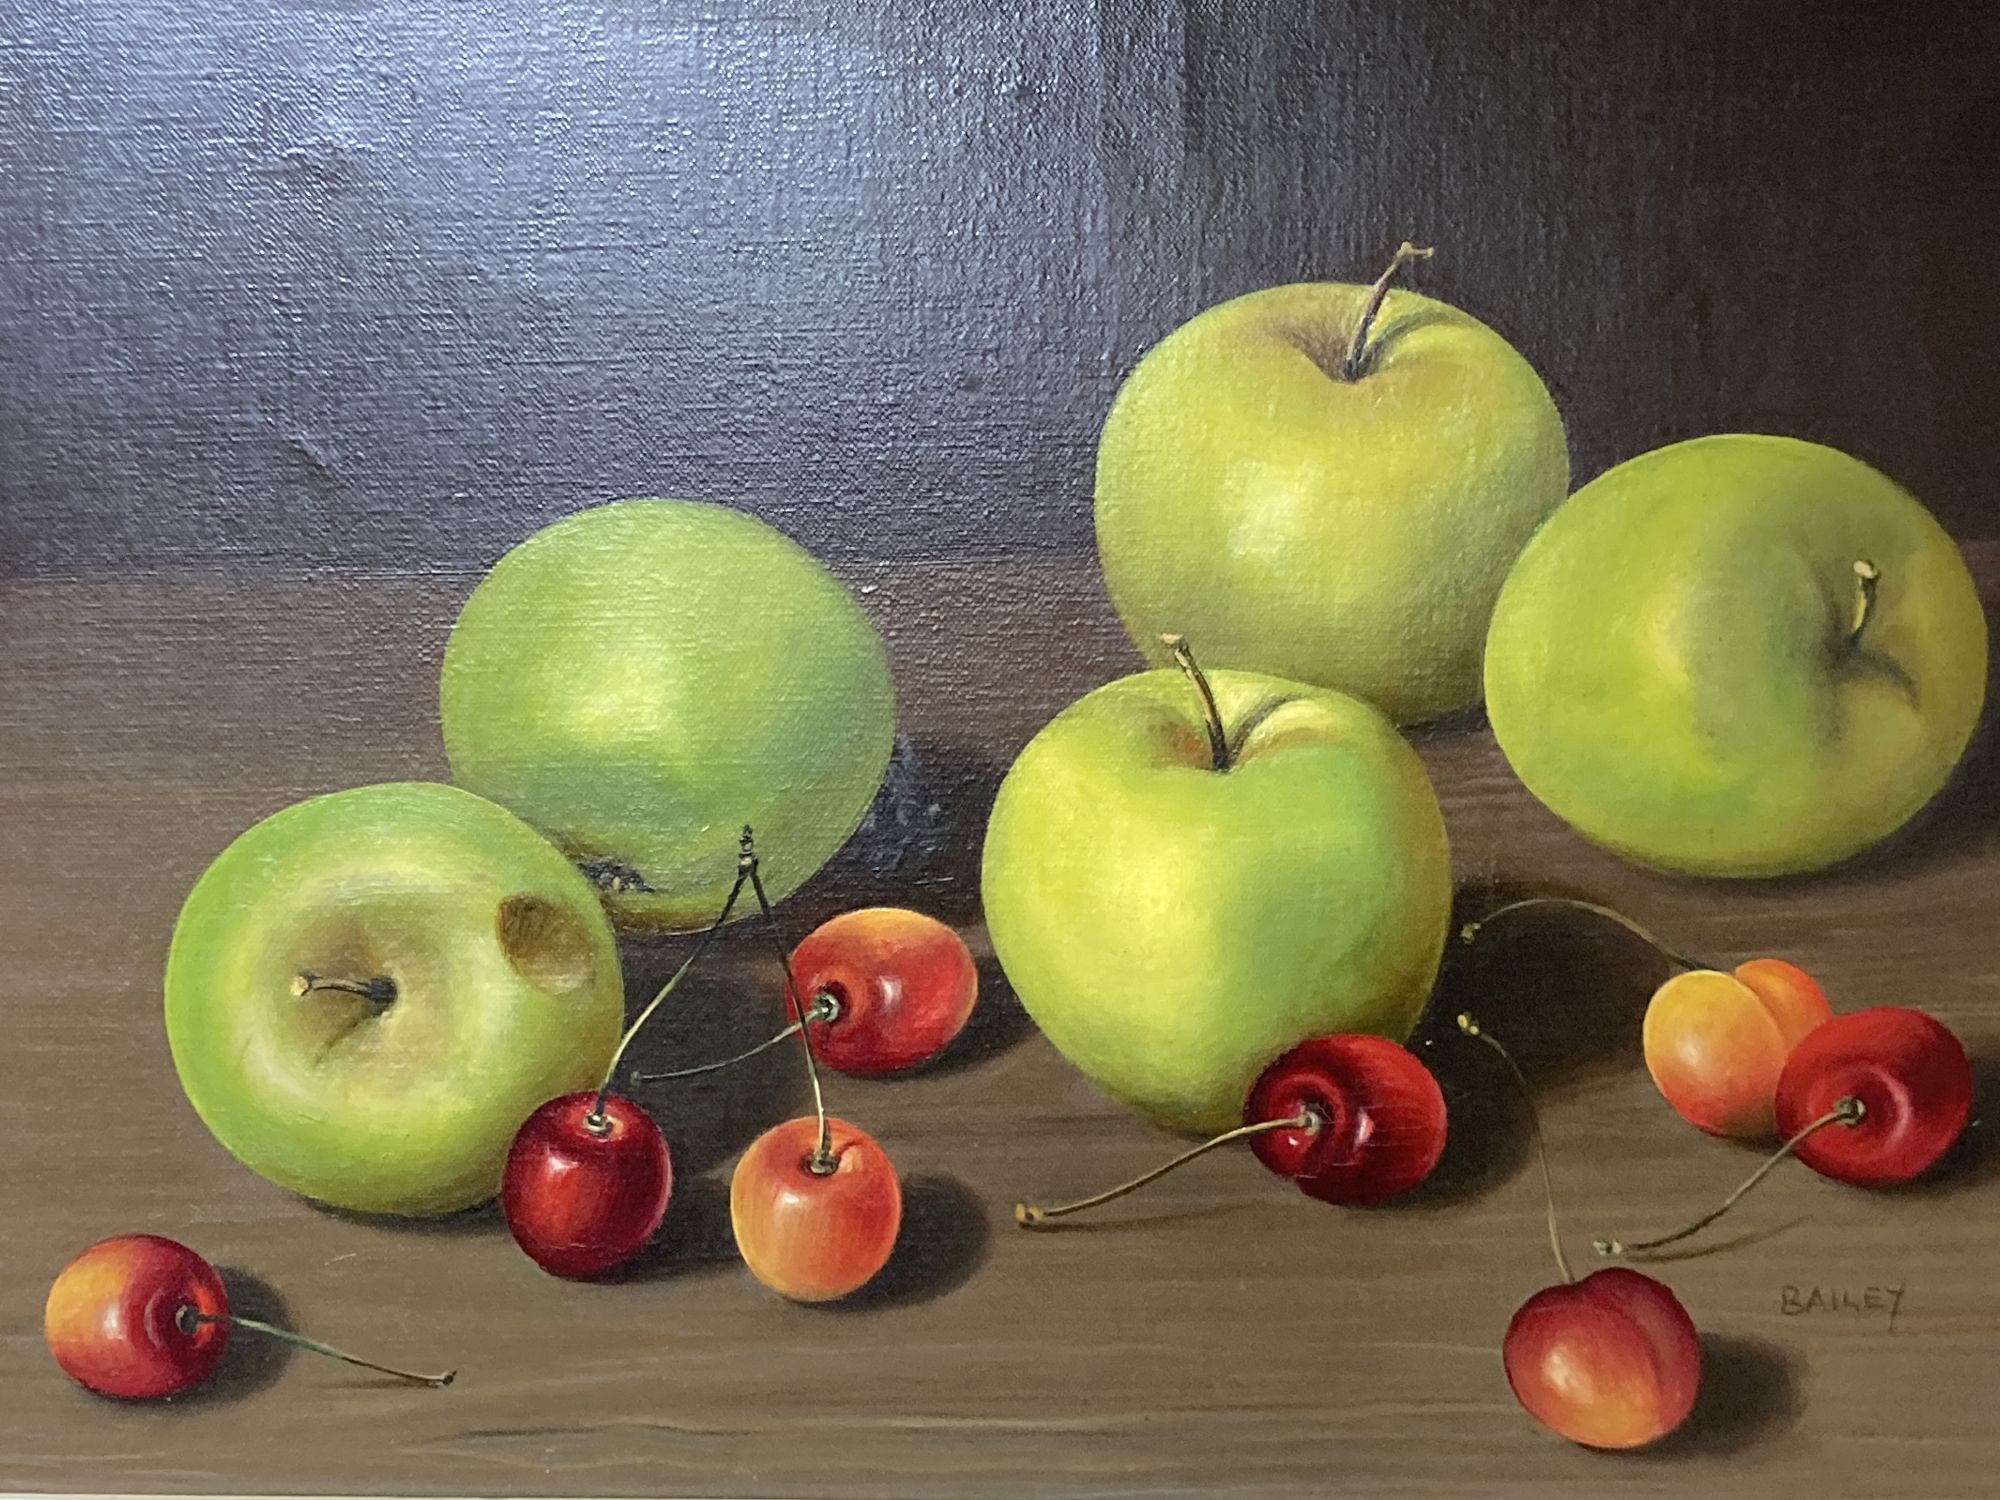 Bailey, oil on canvas, Still life of apples and cherries, signed, 24 x 34cm